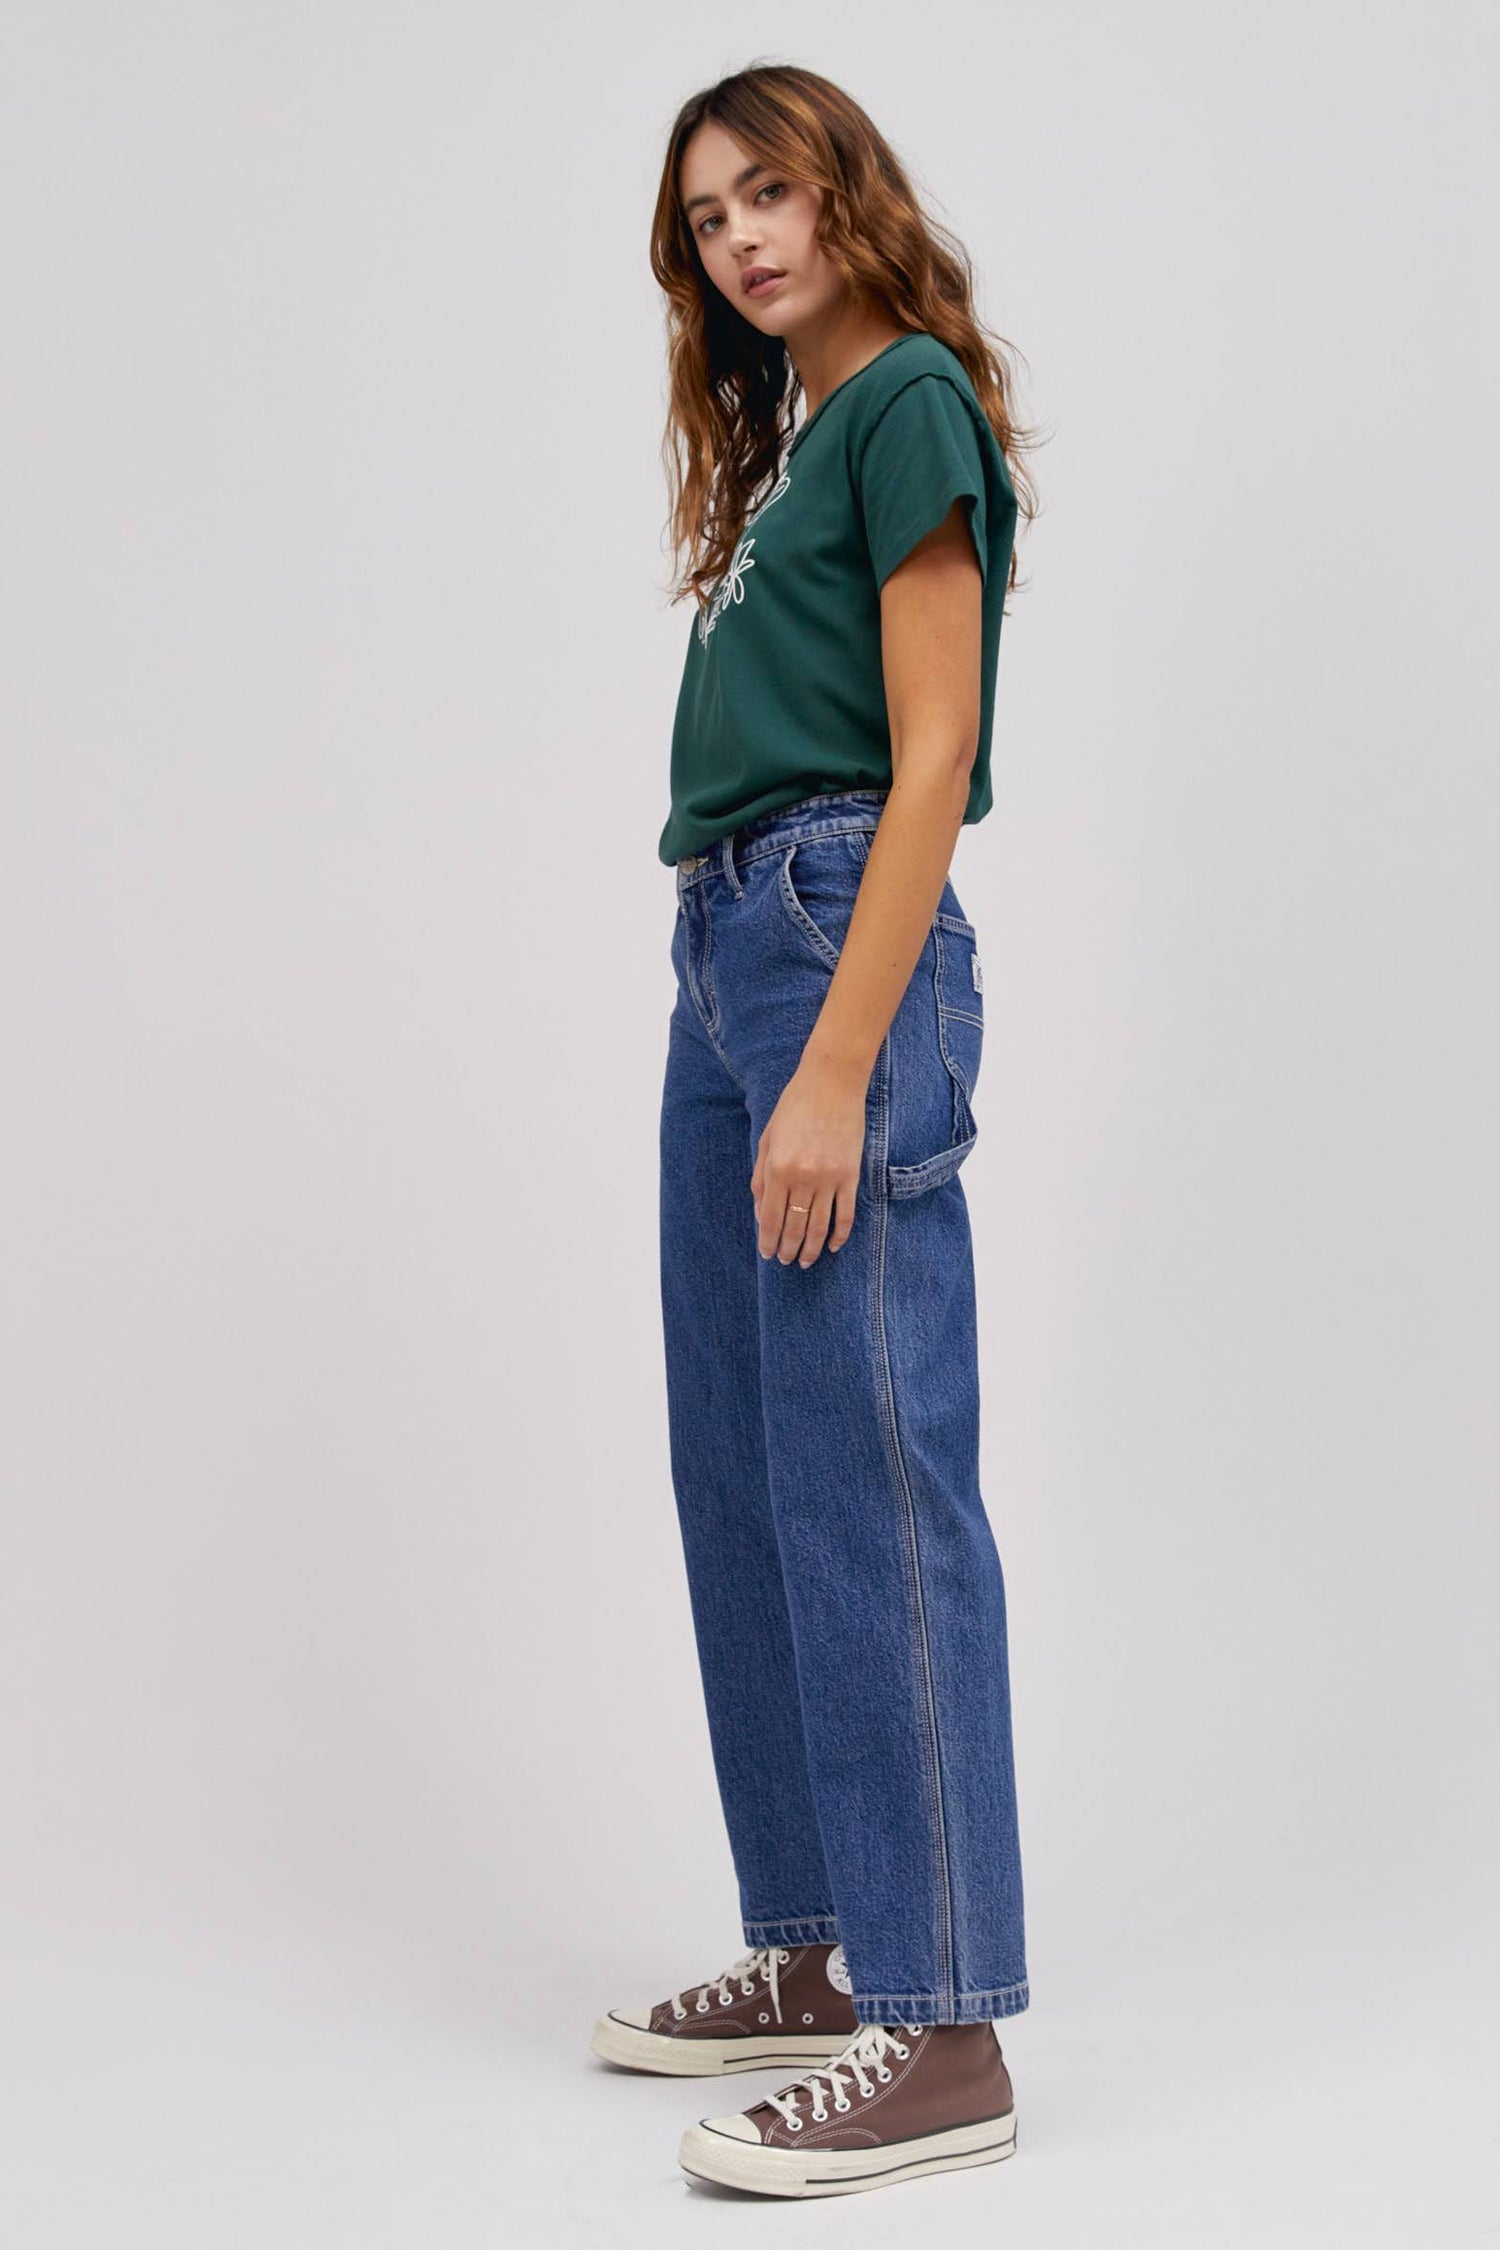 A curly-haired model featuring a pine reverse gf tee with a blue workwear pant made from heavy cotton, accented with key Lee detailing of triple-stitched seams, oversized pockets and a uniform like hammer loop.